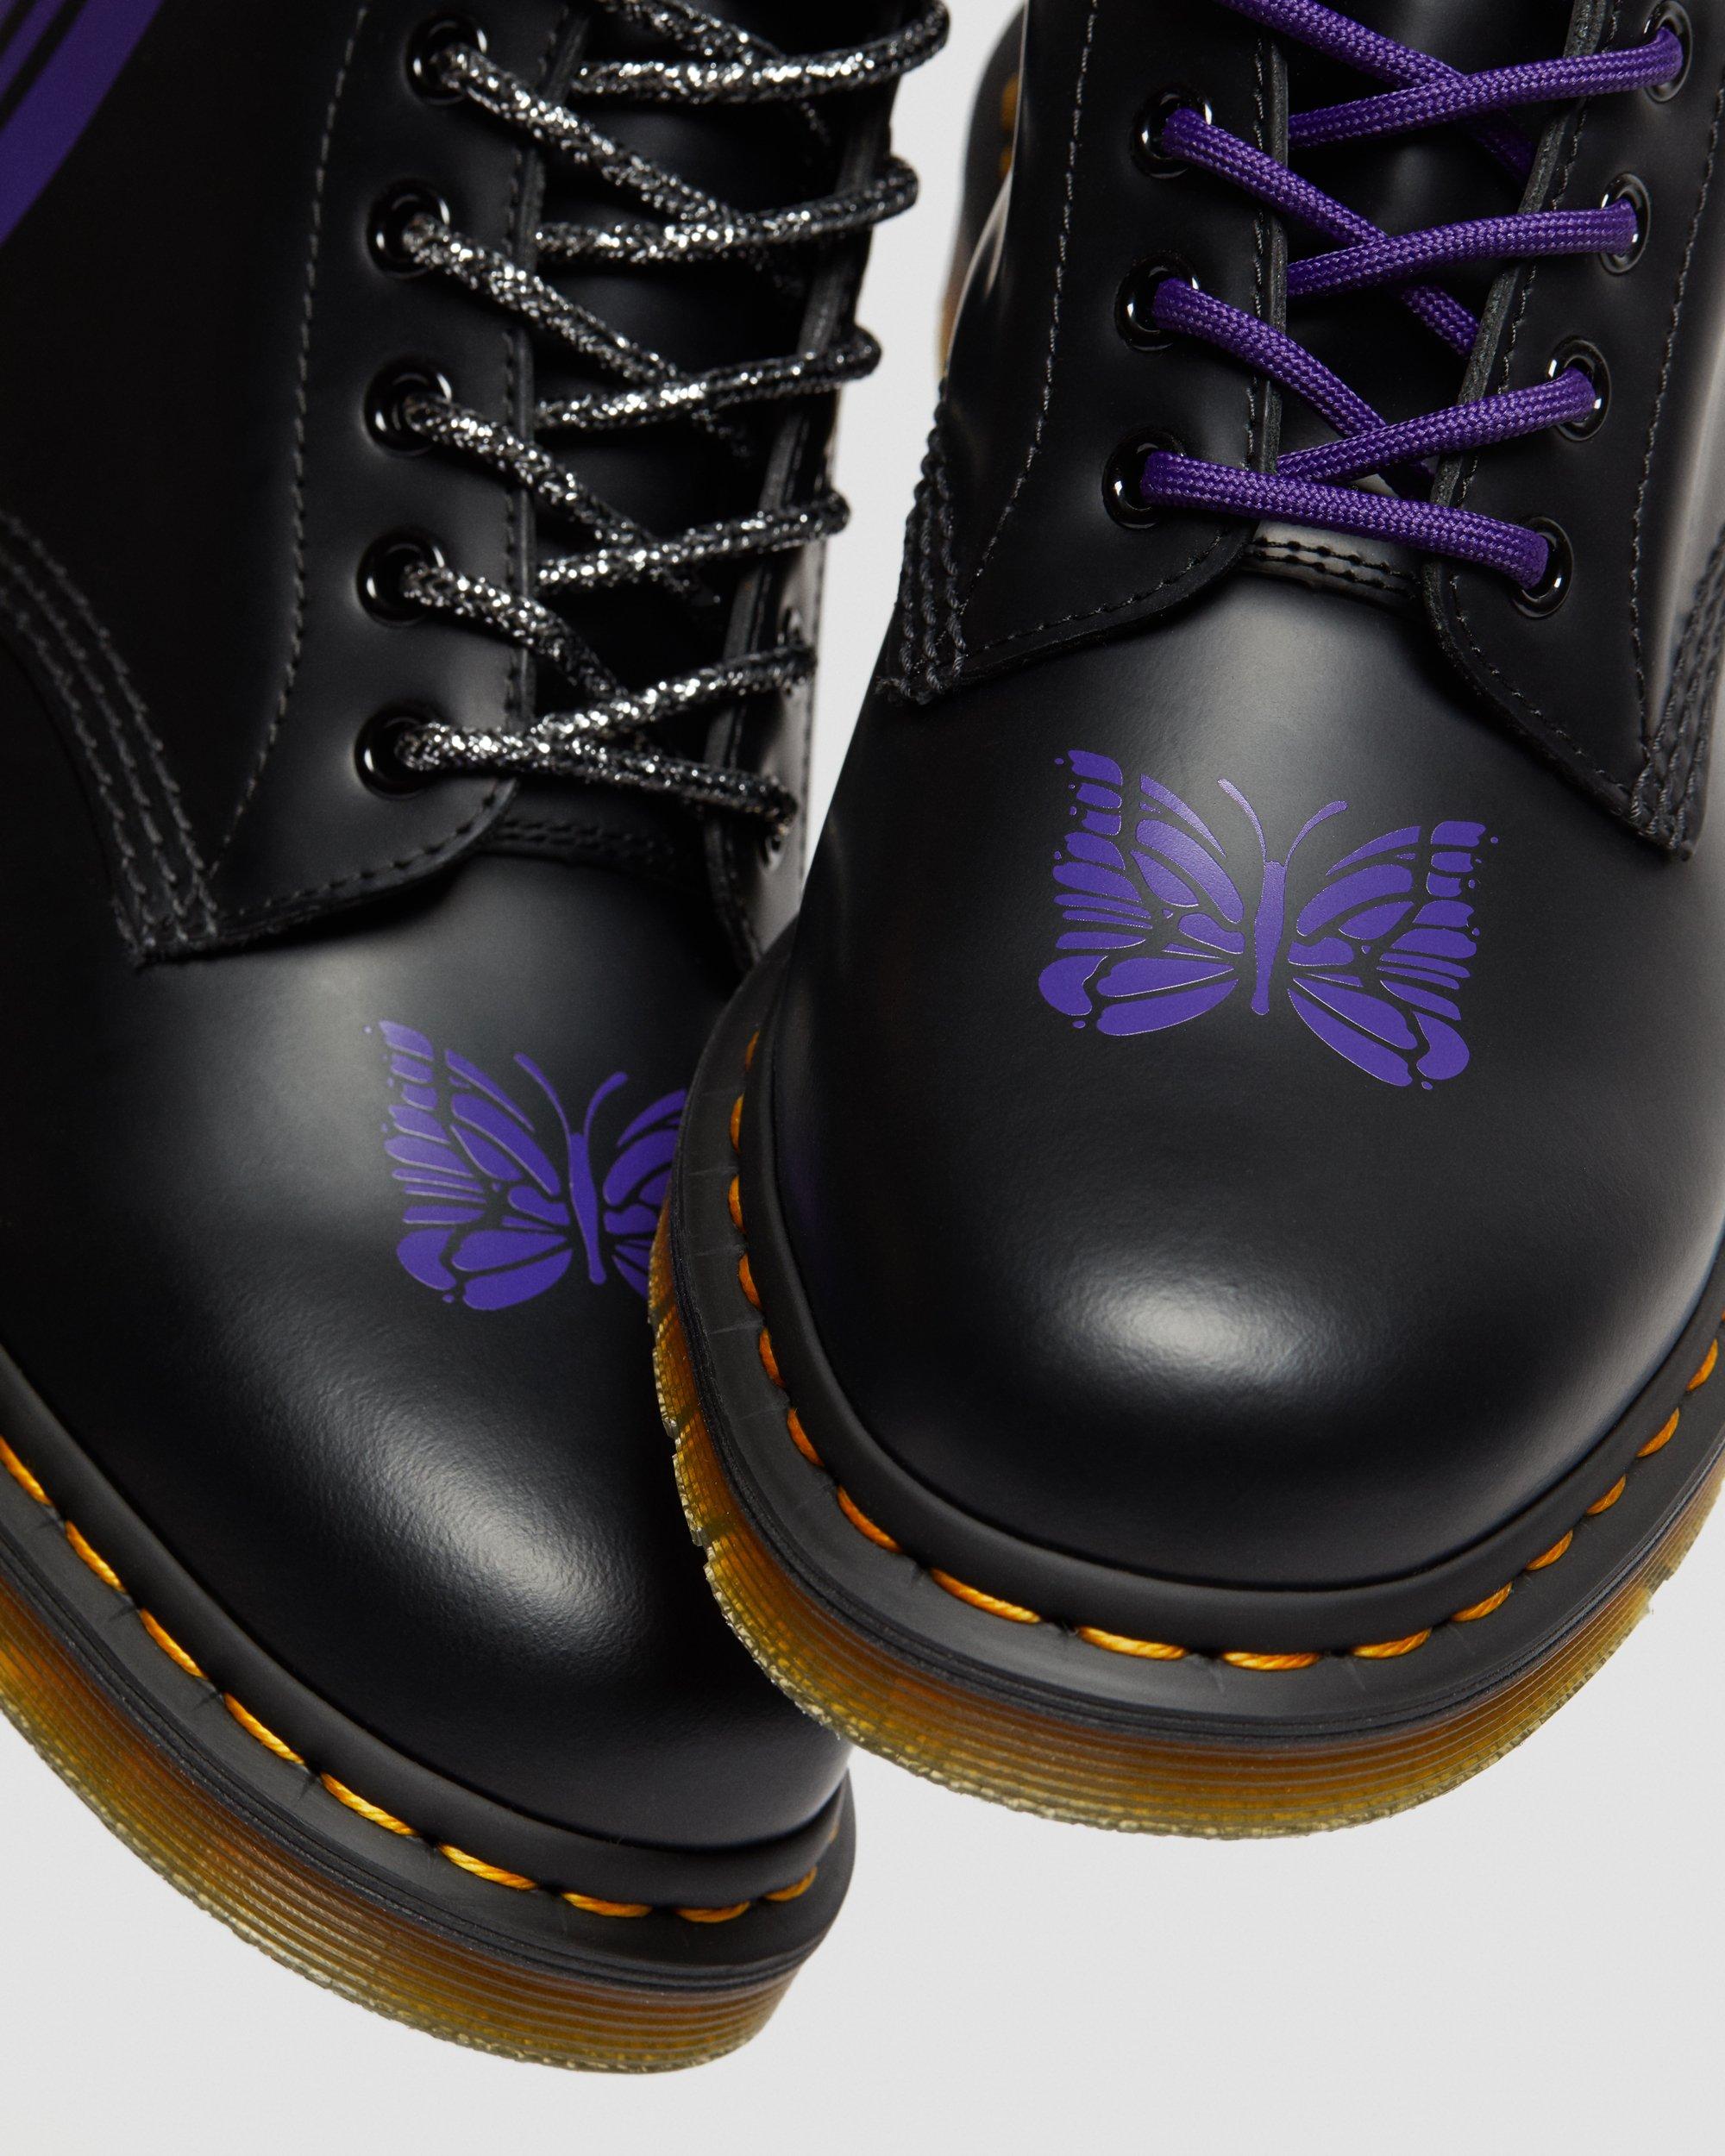 1460 Needles Leather Ankle Boots in Black+Purple